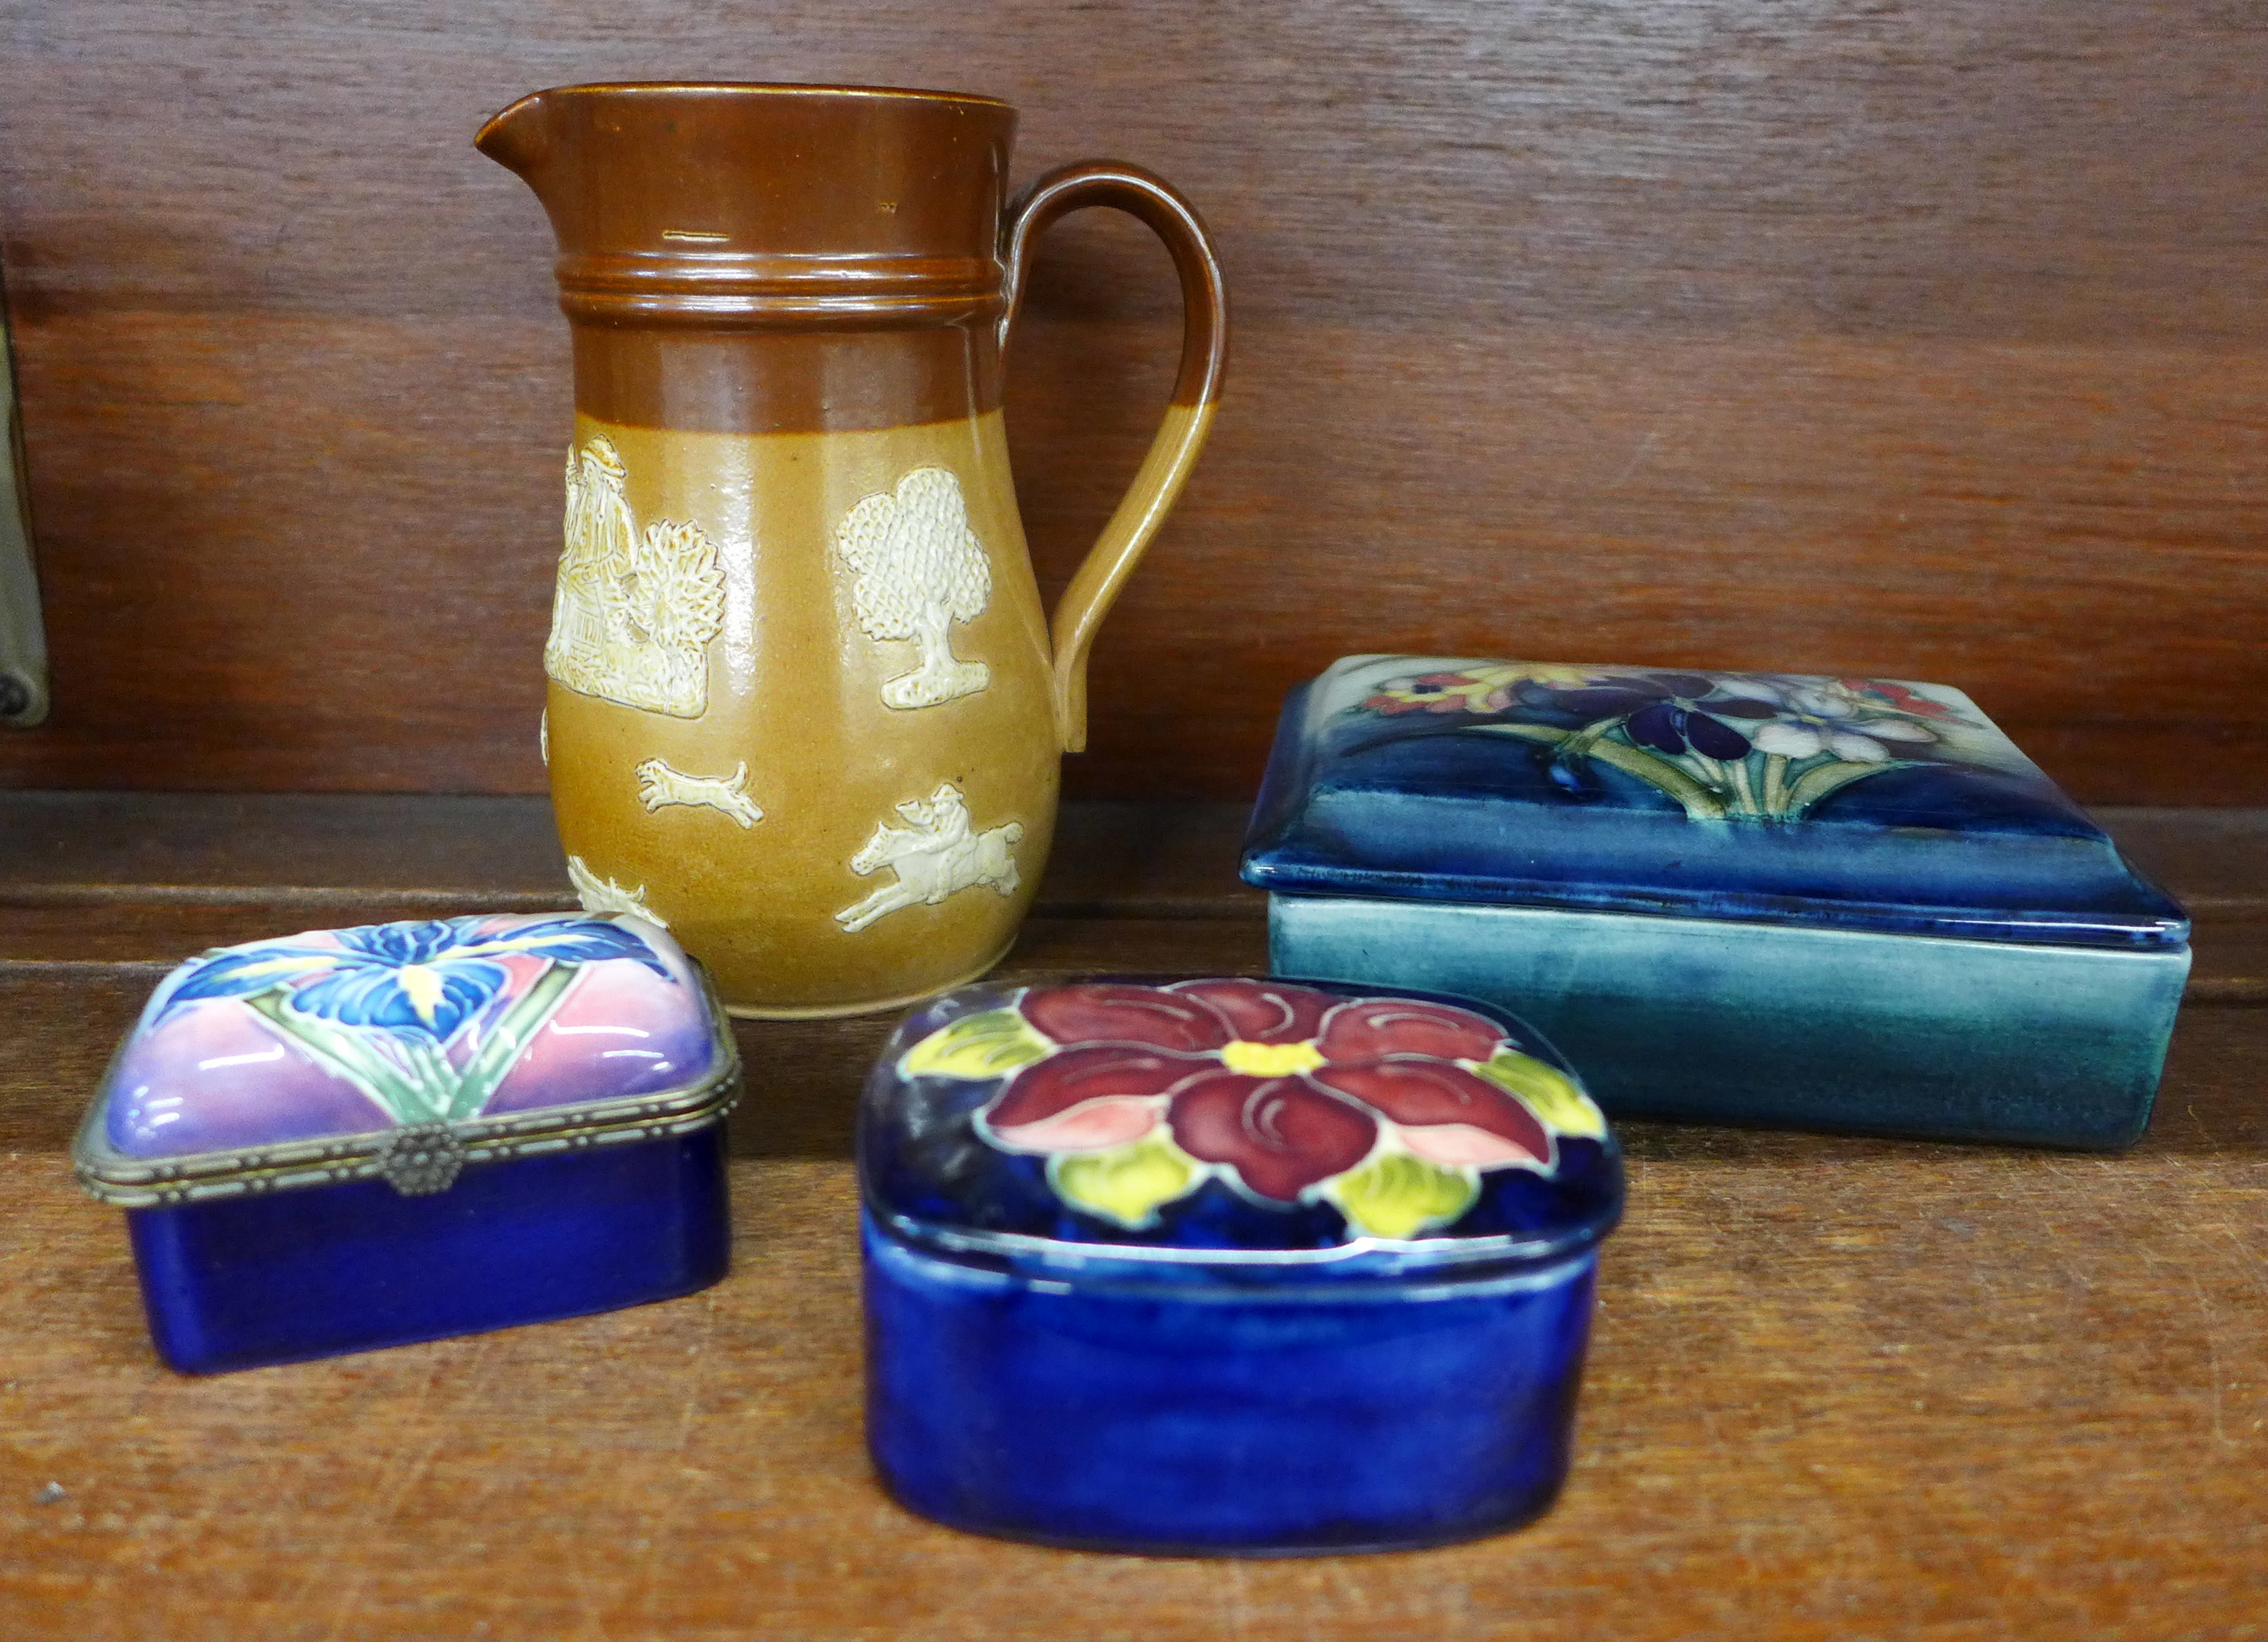 Two Moorcroft pots, the larger one signed W.Moorcroft, an Old Tupton ware pot, and a Royal Doulton